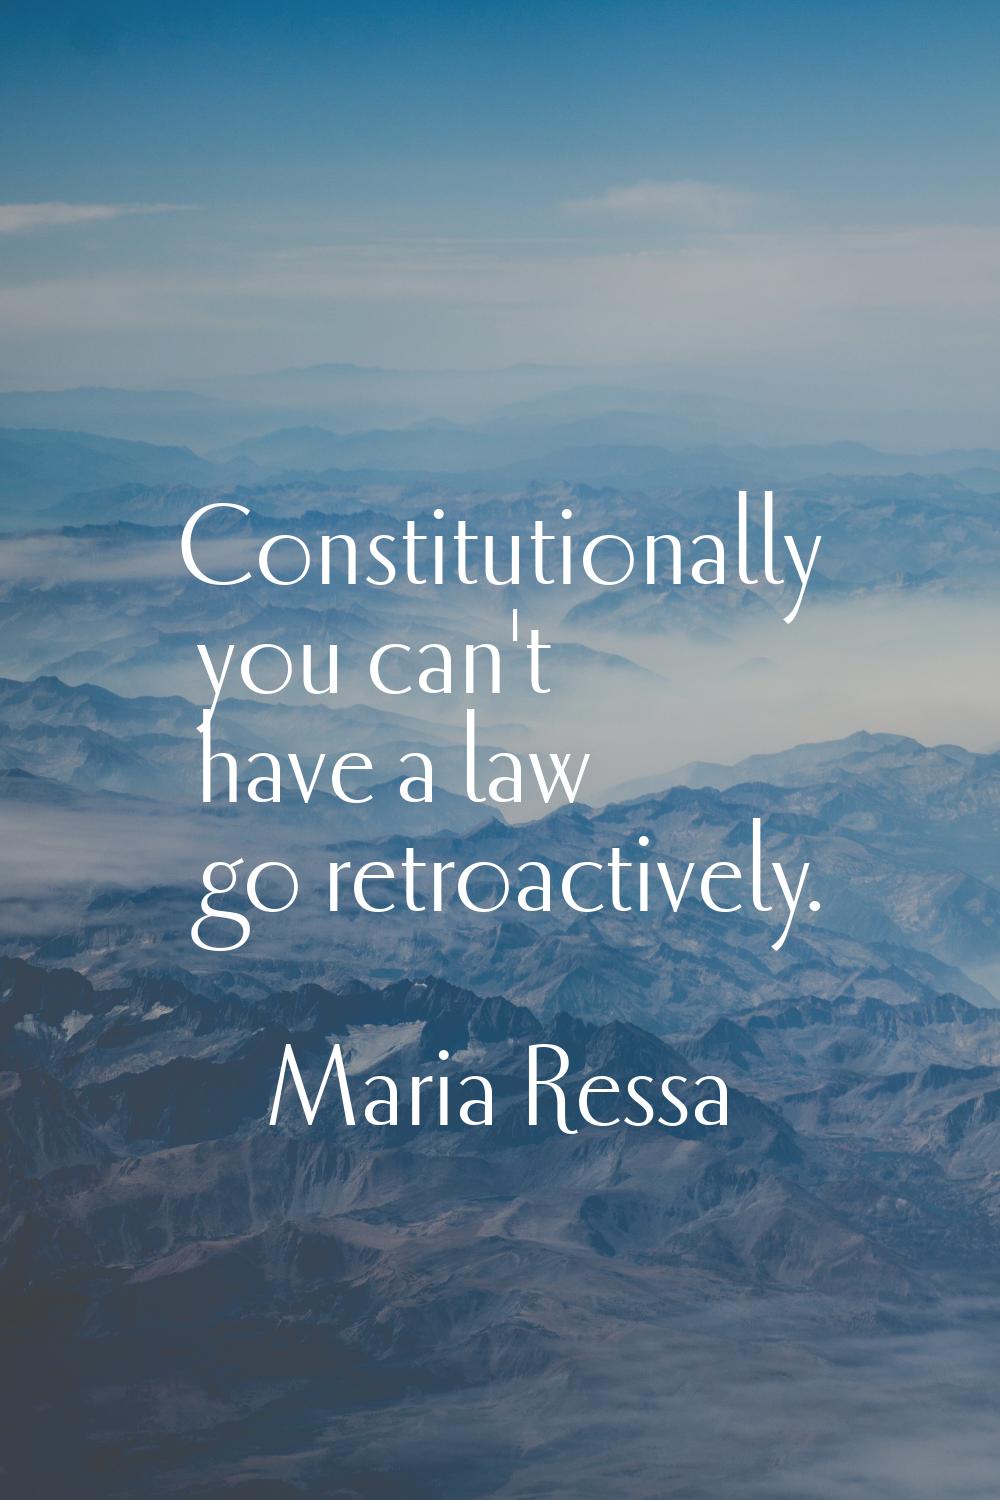 Constitutionally you can't have a law go retroactively.